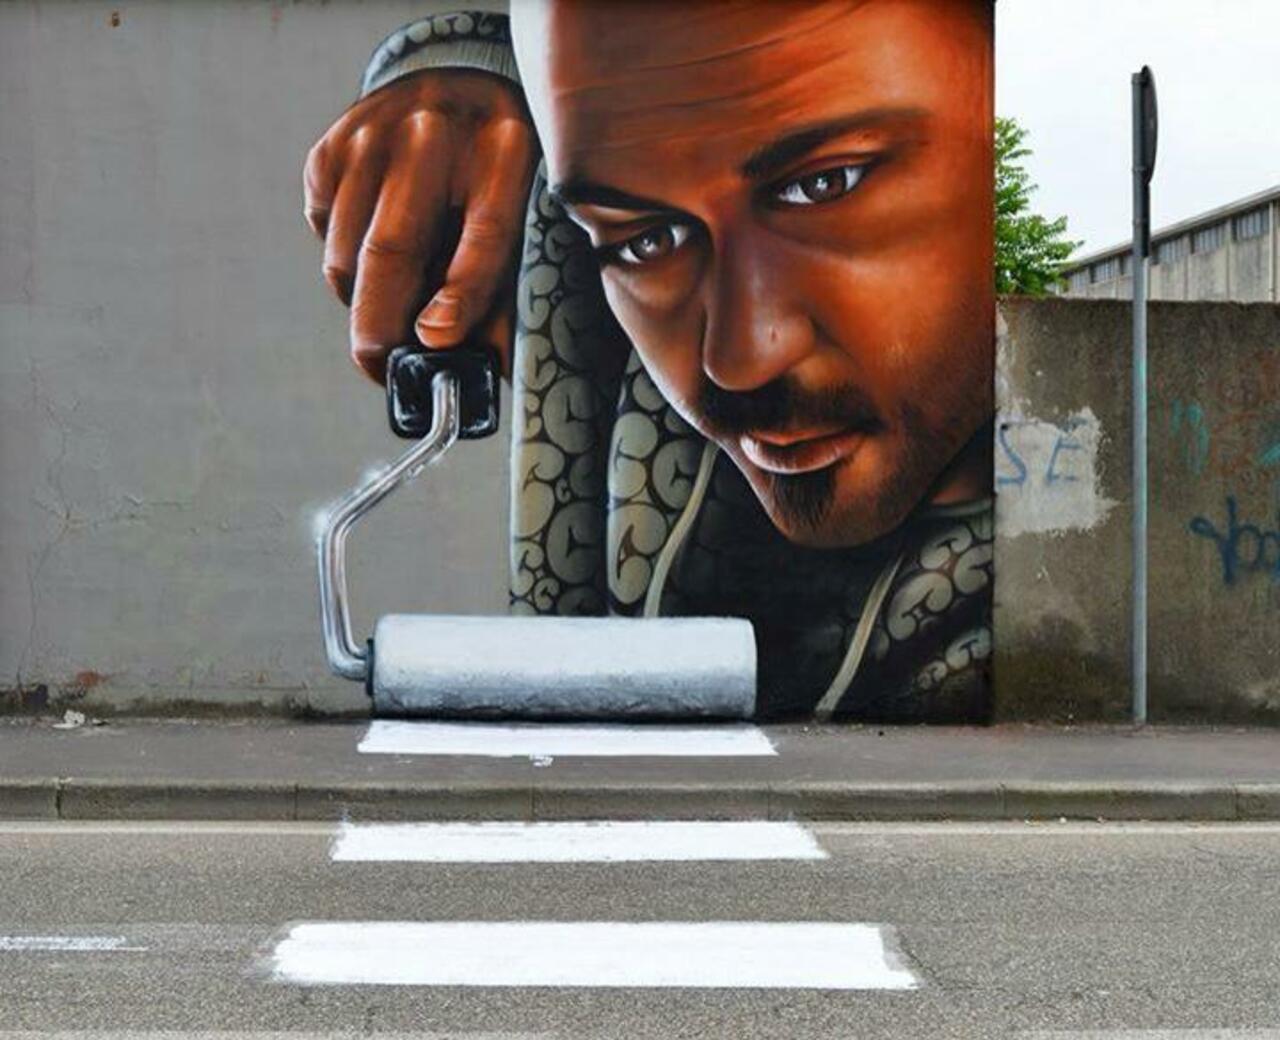 RT @GoogleStreetArt: Great placement in this clever Street Art piece by Cheone in Italy 

#art #arte #graffiti #streetart http://t.co/XYjD8PGZch